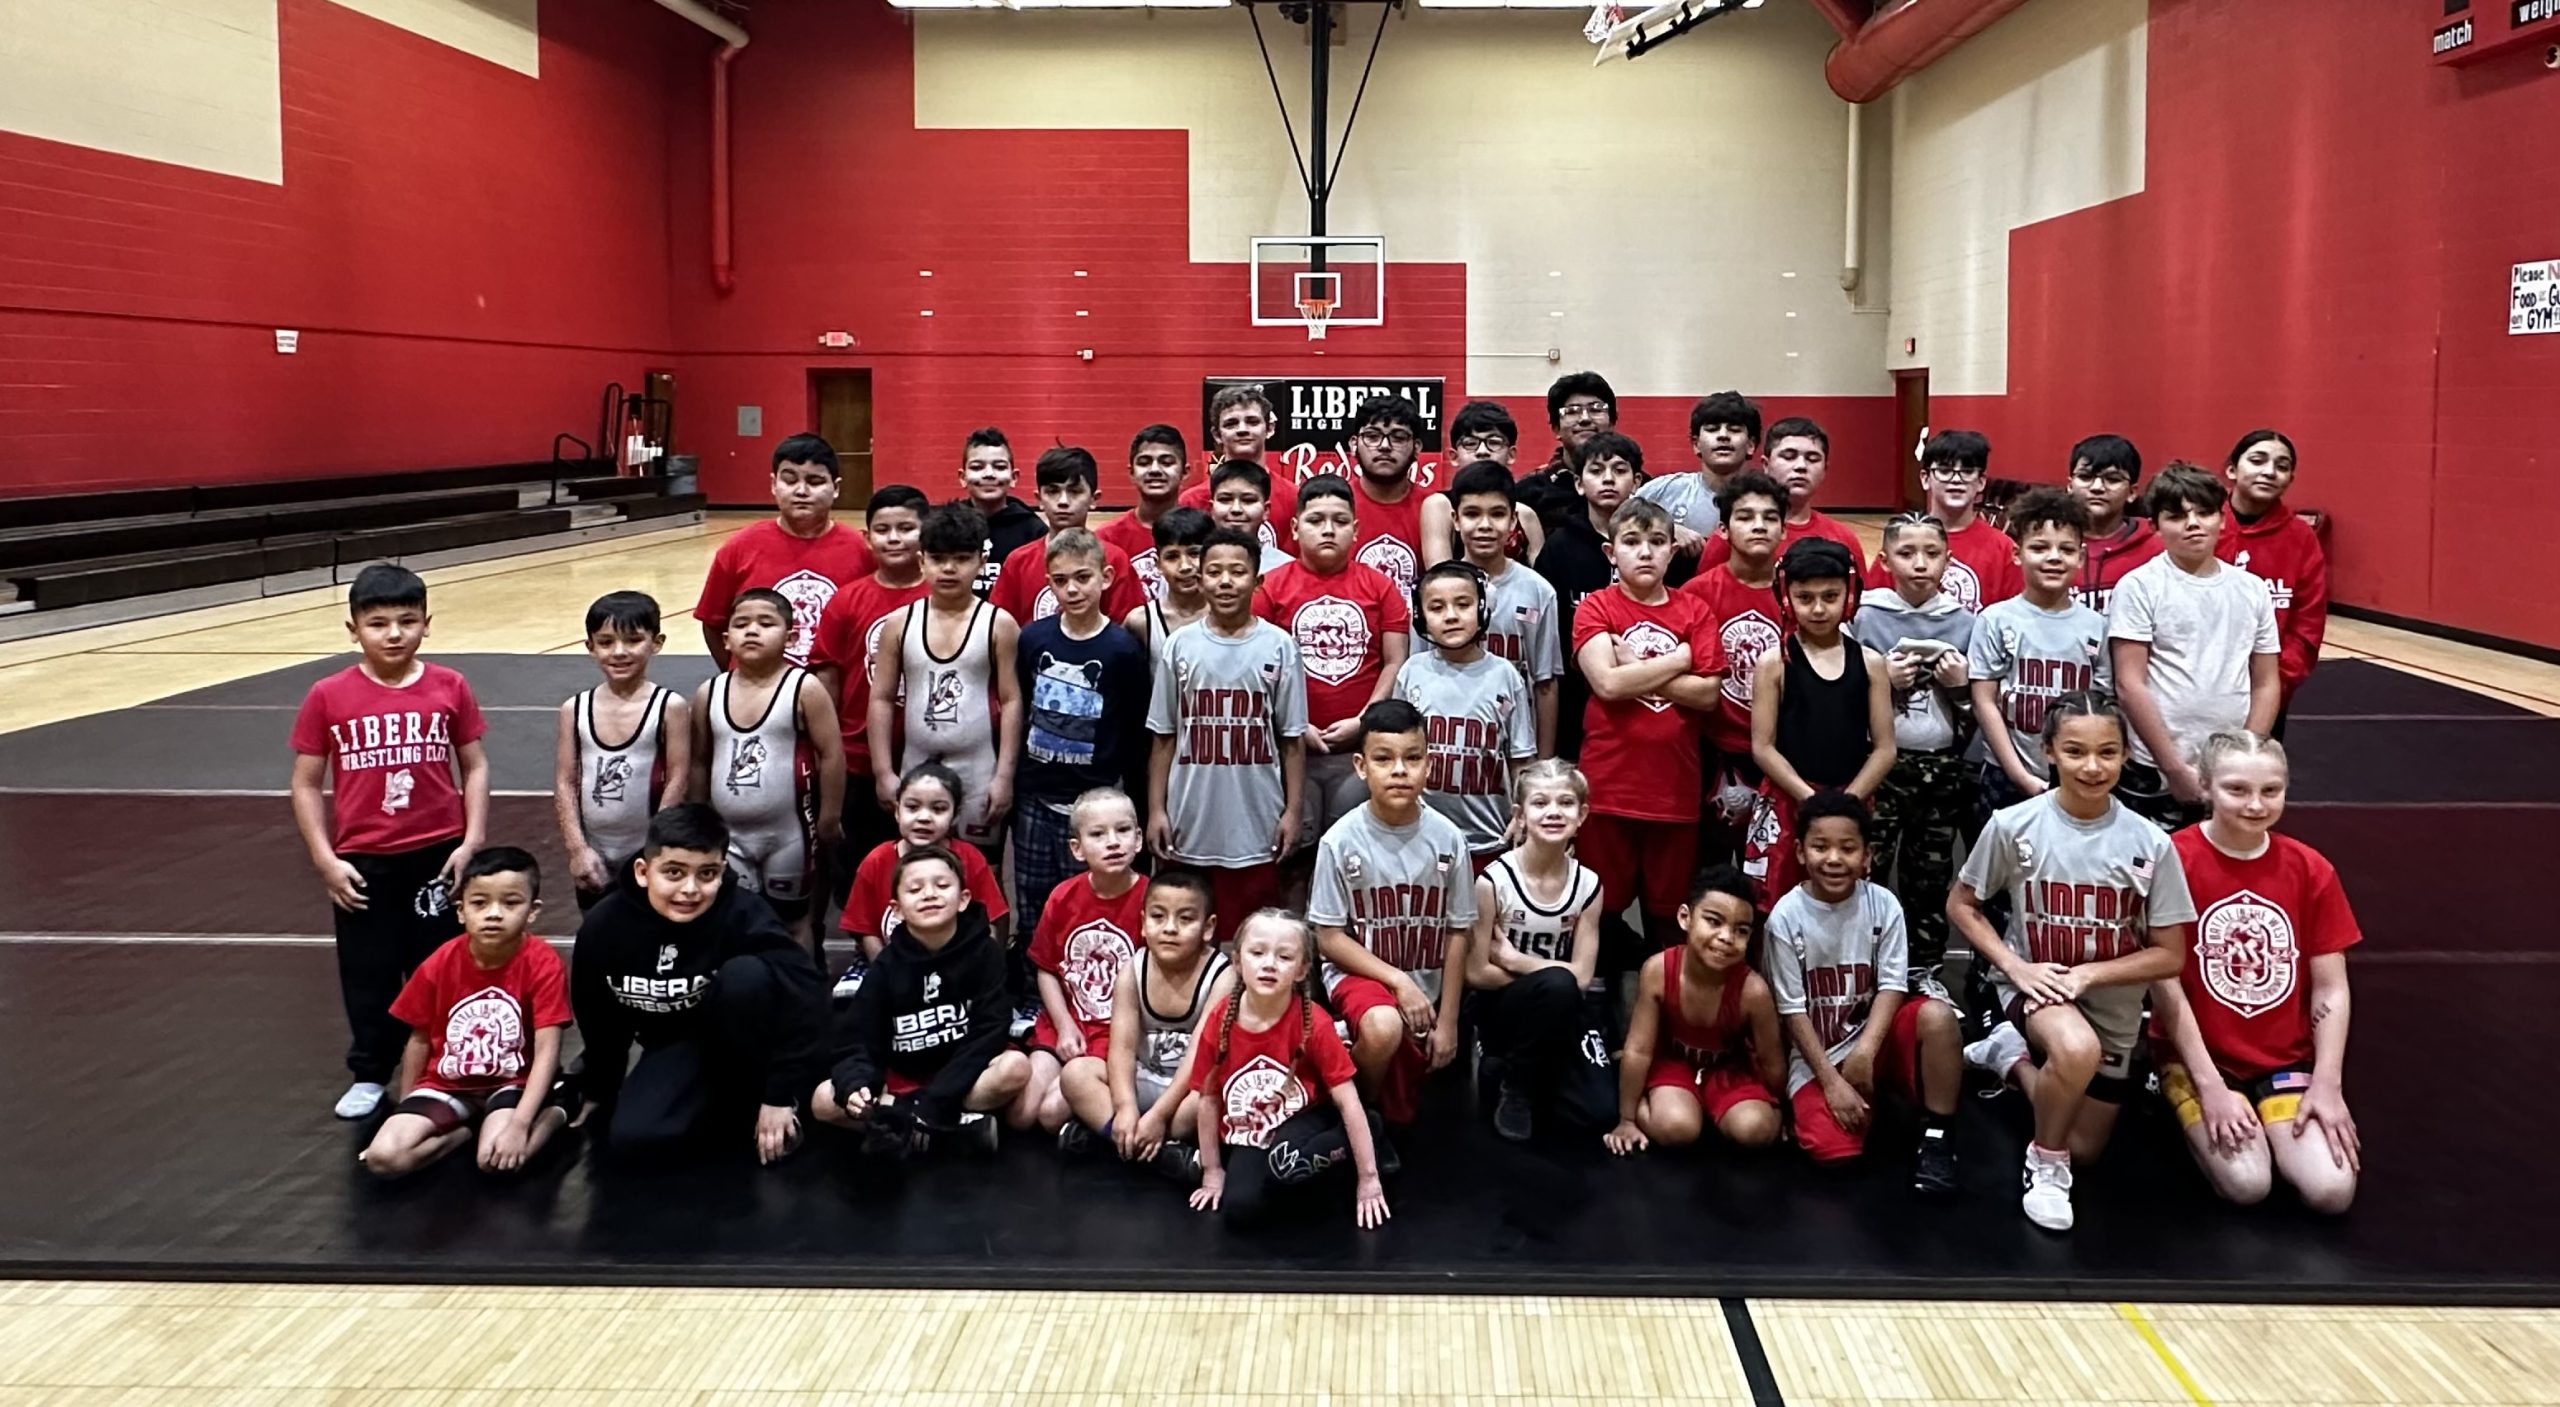 Liberal Wrestling Club Holds Battle in the West